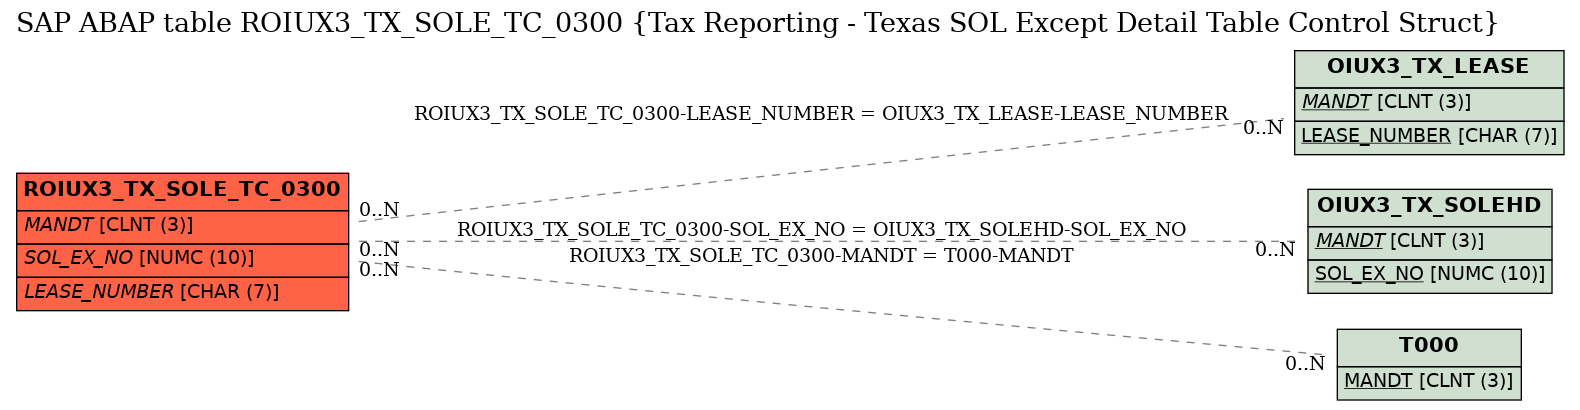 E-R Diagram for table ROIUX3_TX_SOLE_TC_0300 (Tax Reporting - Texas SOL Except Detail Table Control Struct)